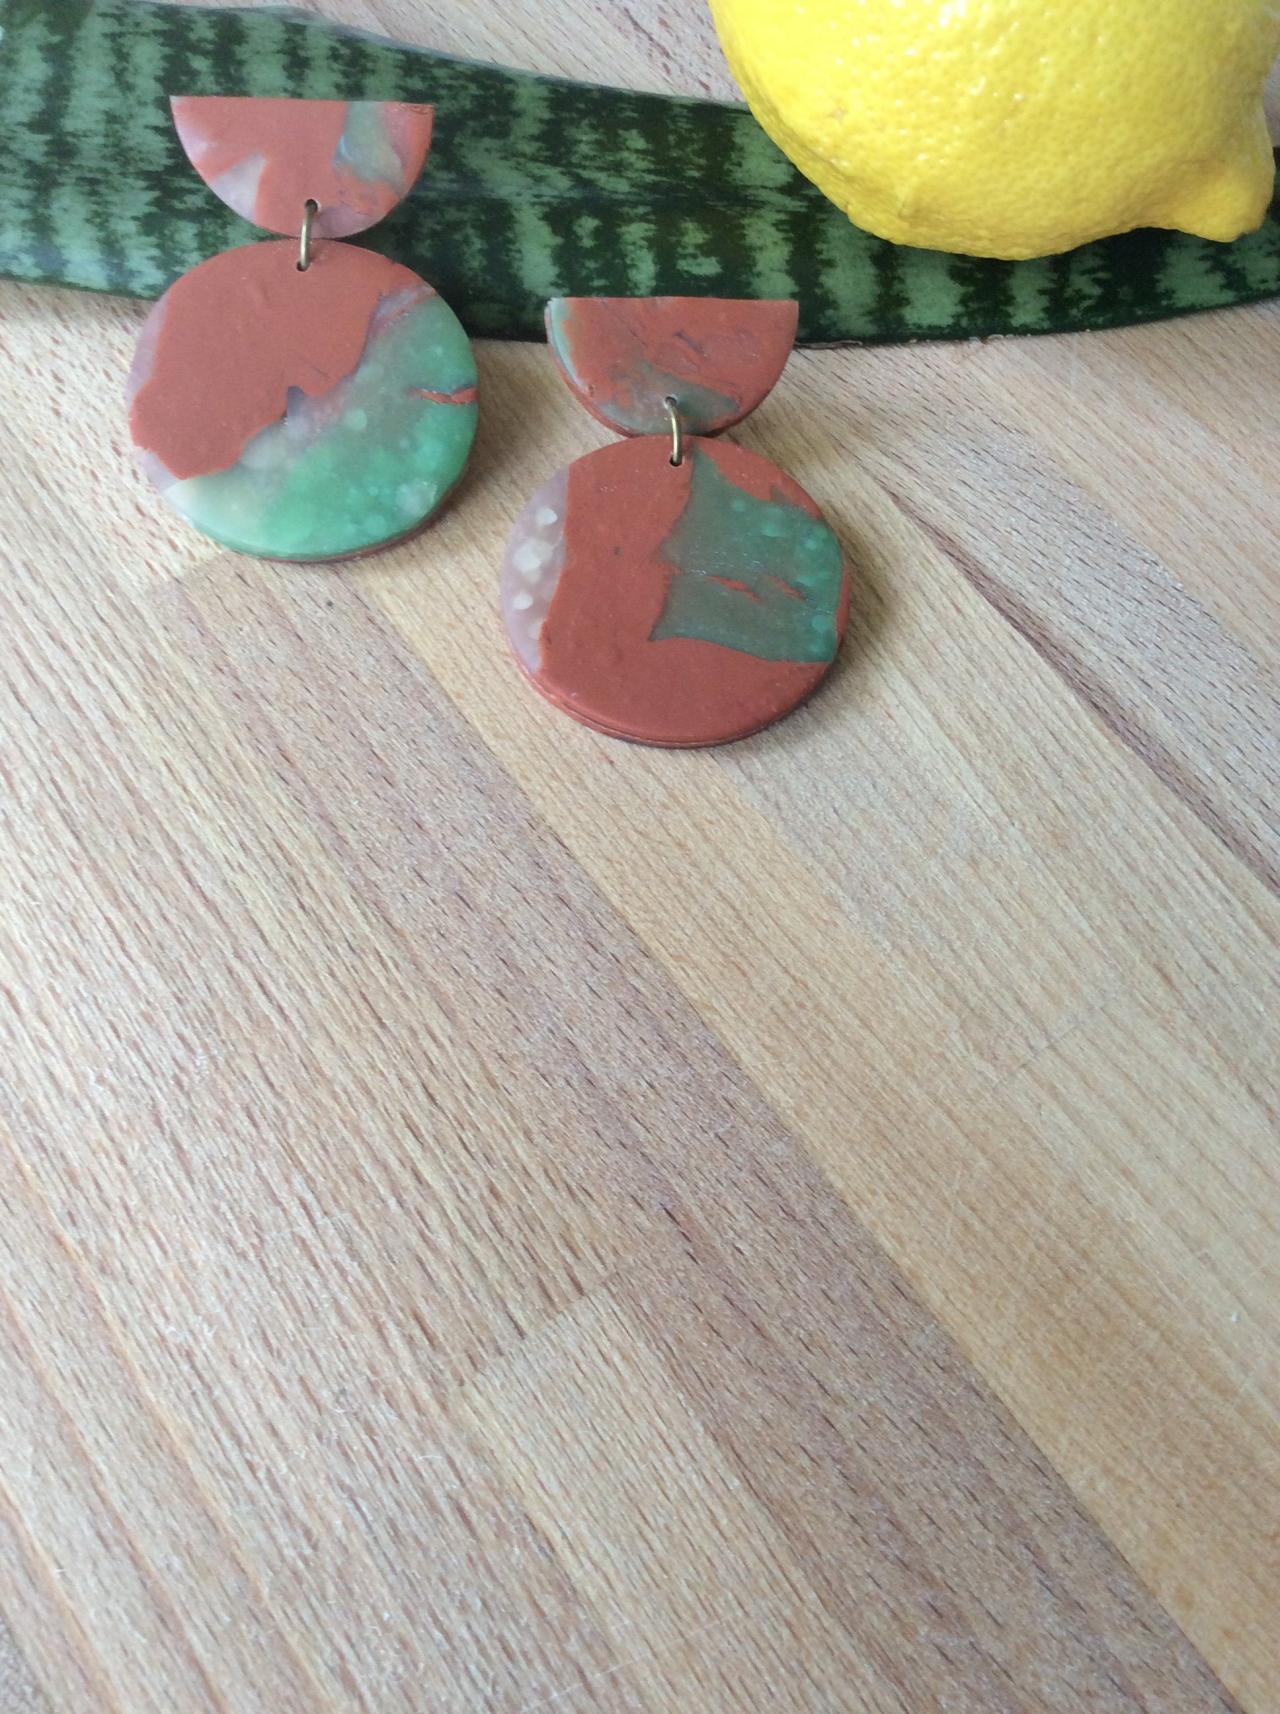 Stormy Half Circle In Brown, Green, And Translucent Polymer Clay Drop Earrings | Simple Cute Polymer Clay Earrings